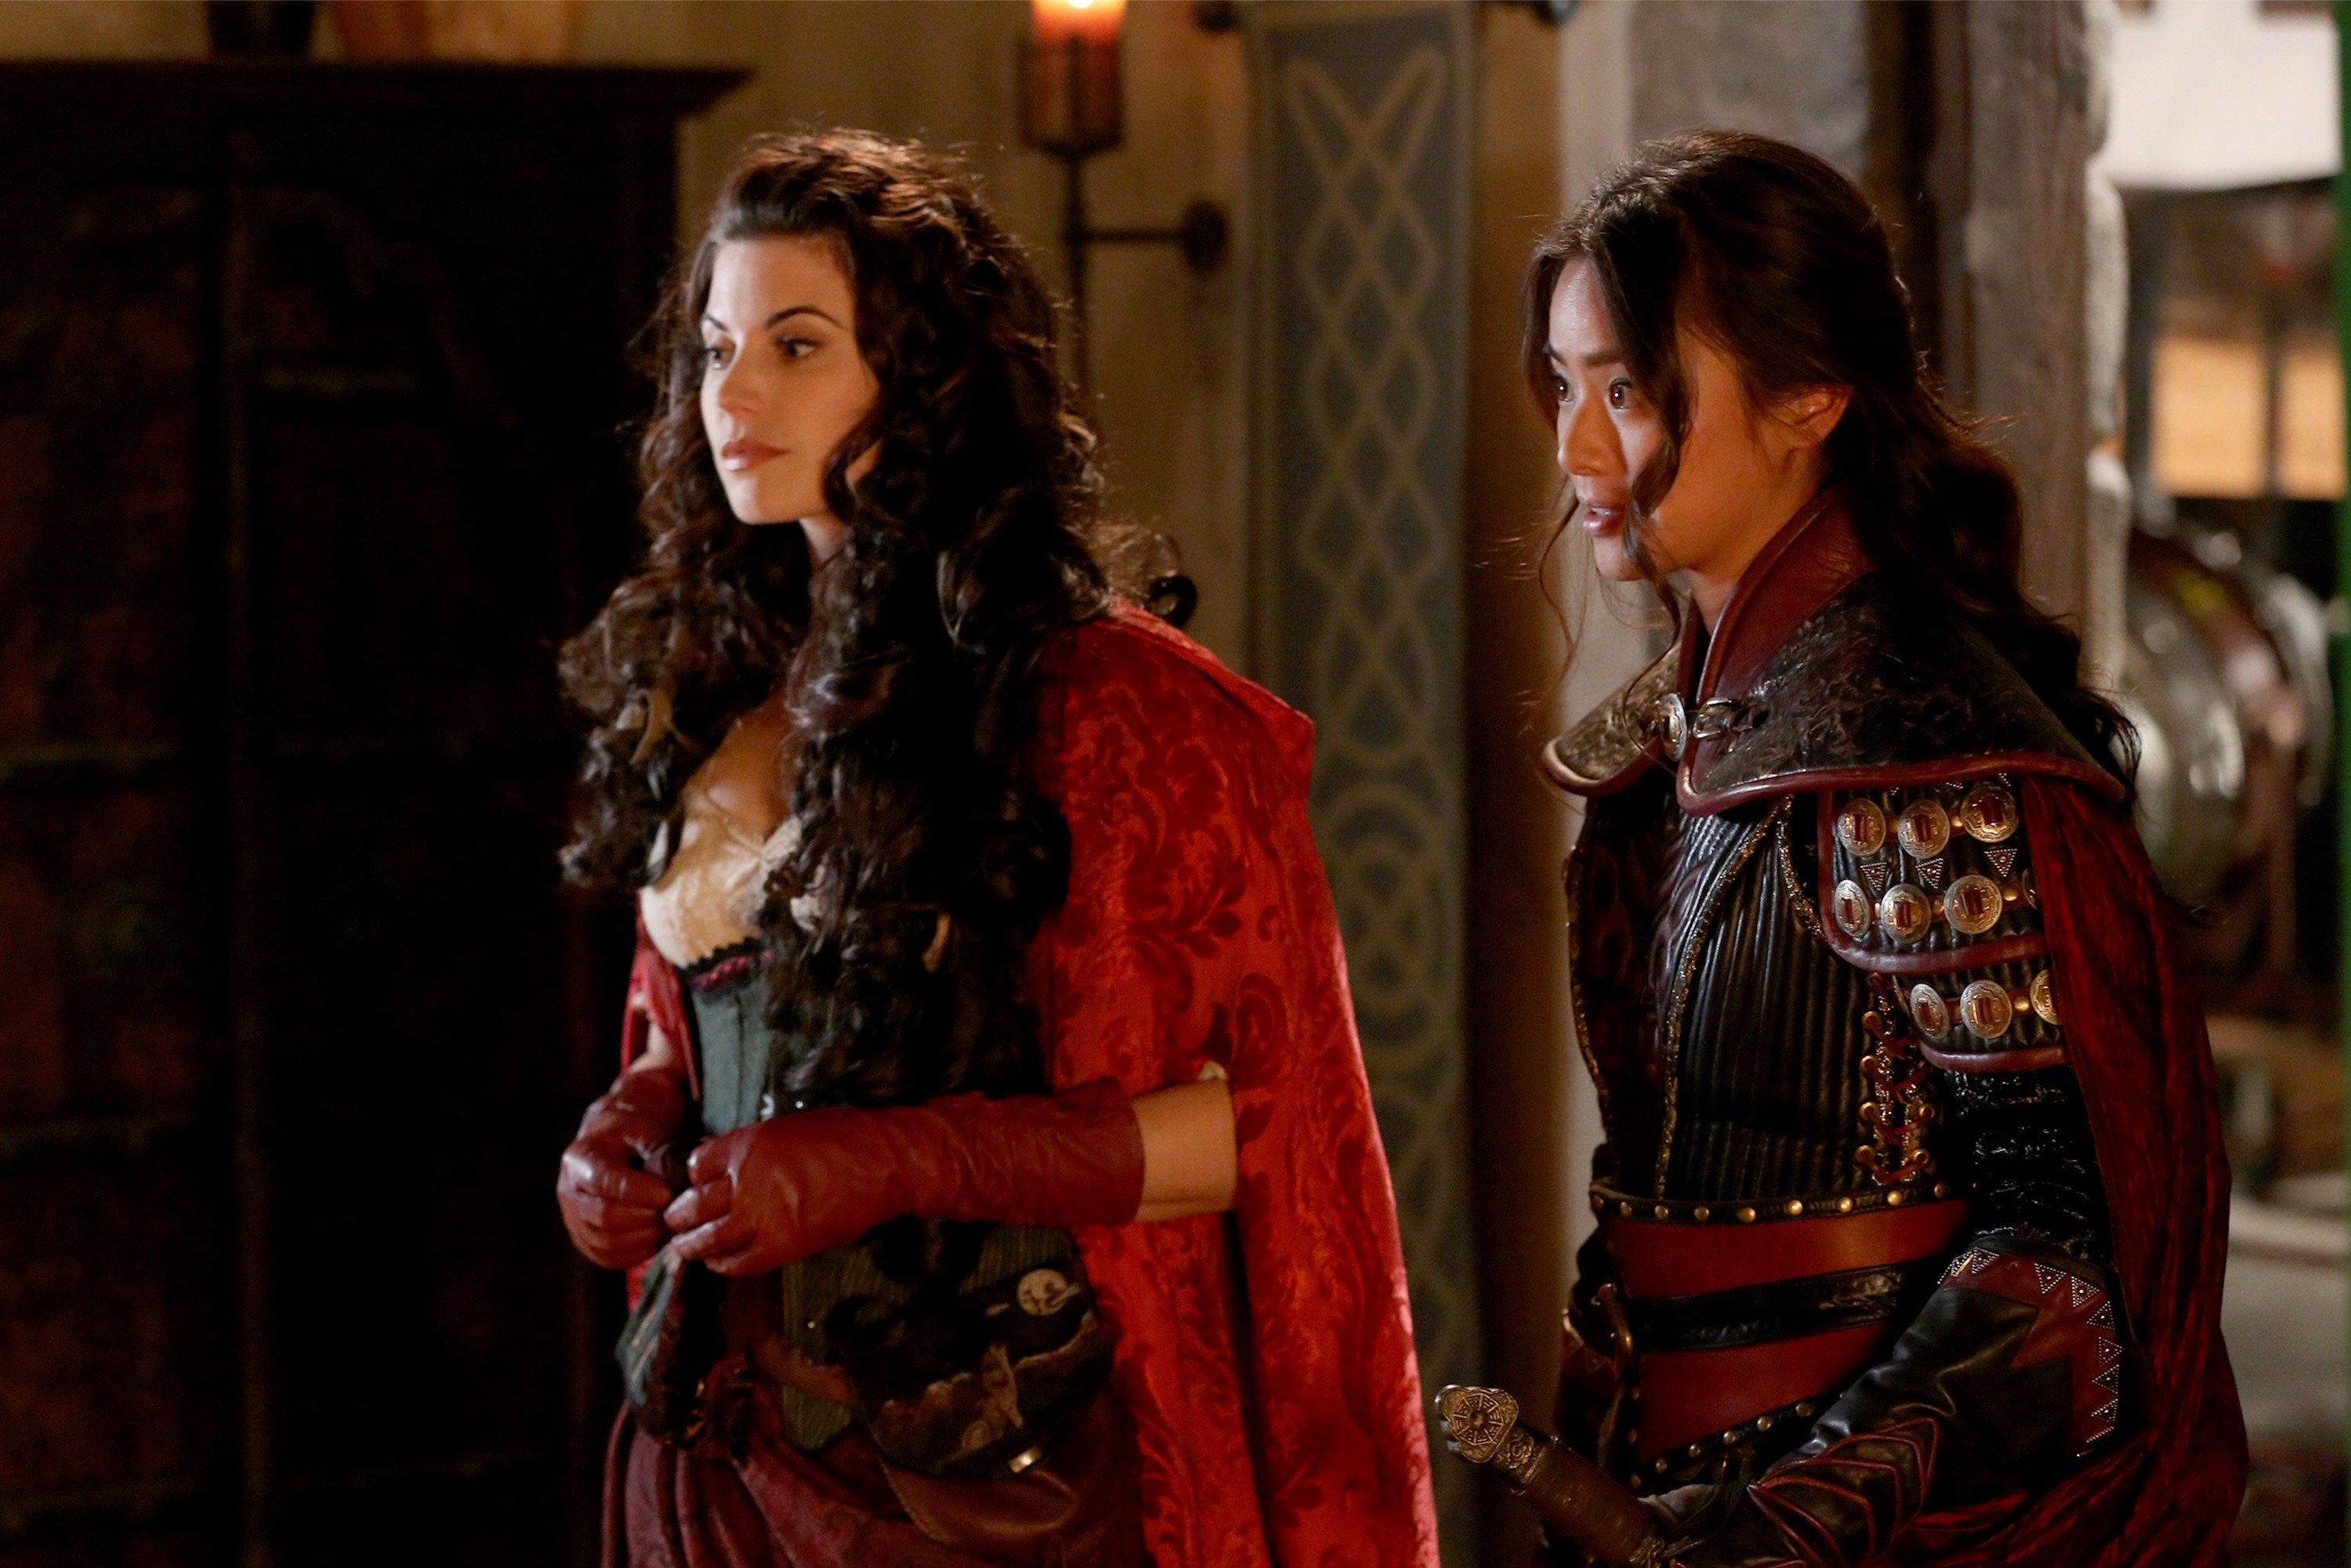 Meghan Ory wearing a red cape in 'Once Upon a Time'